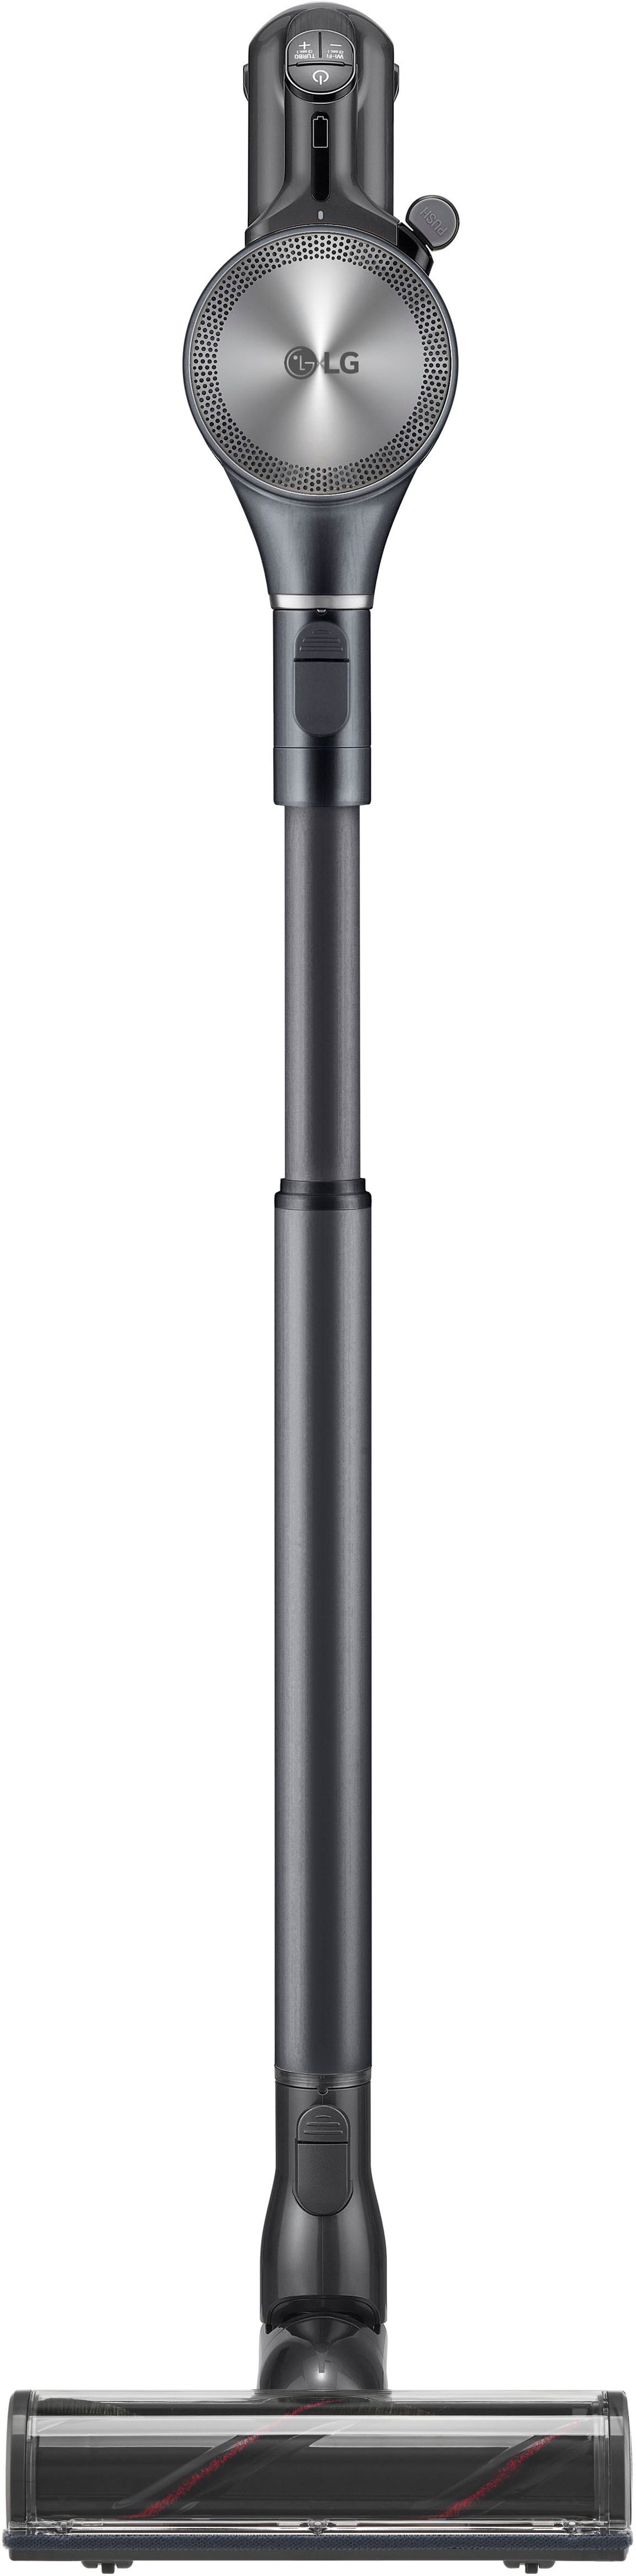 LG - CordZero Cordless Stick Vacuum with All-in-One Tower - Iron Grey_2